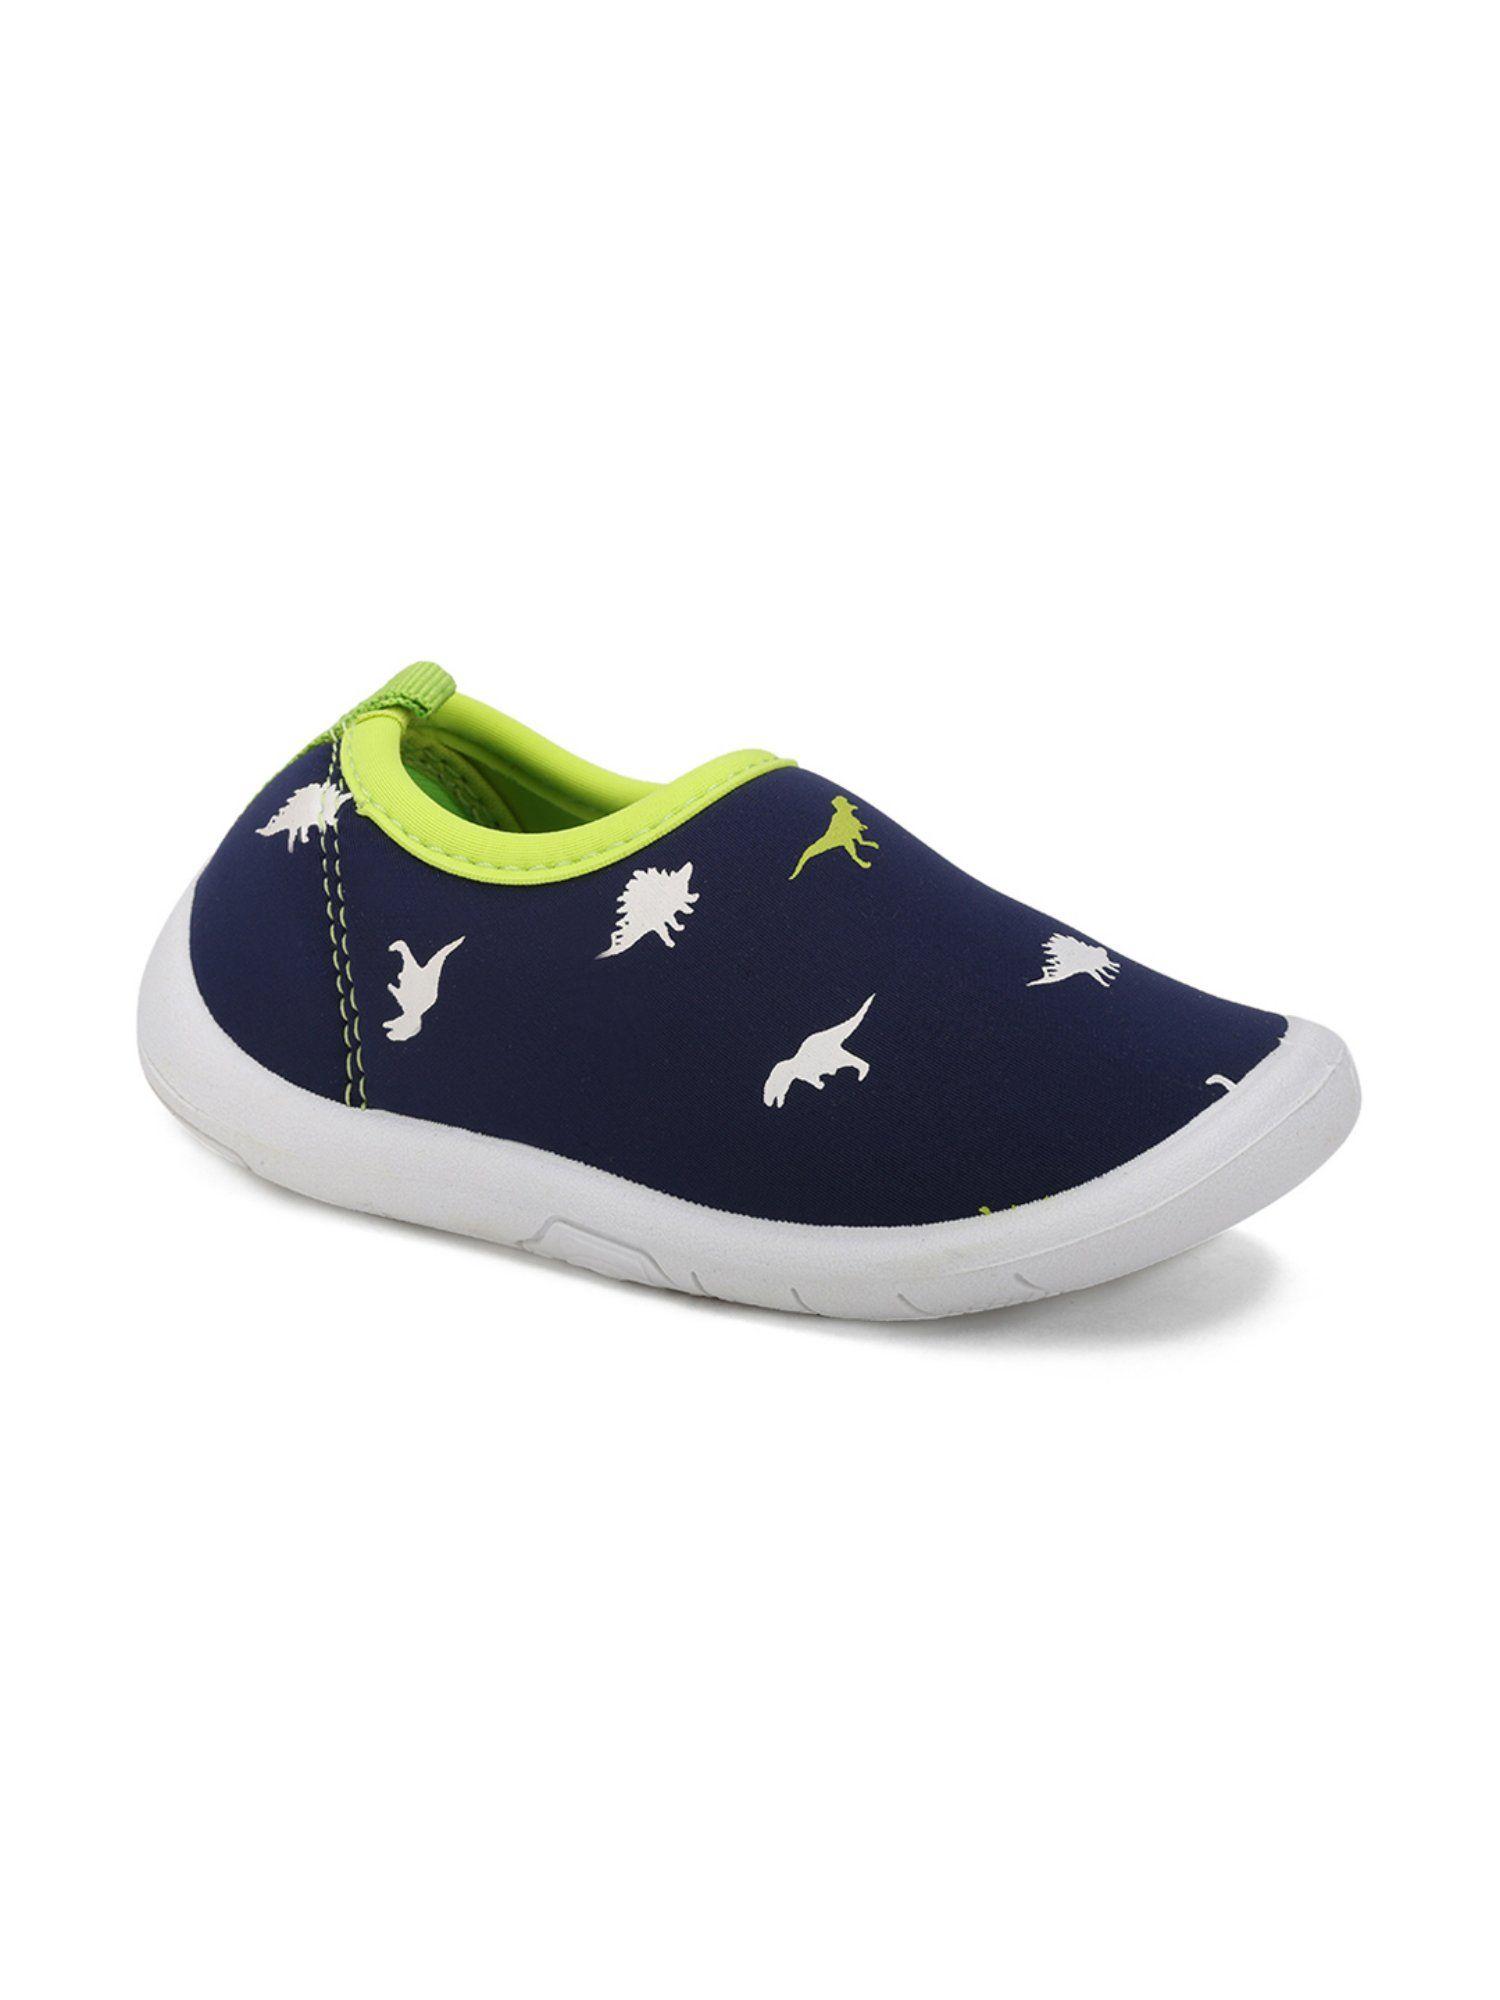 kids-slip-on-casual-shoes